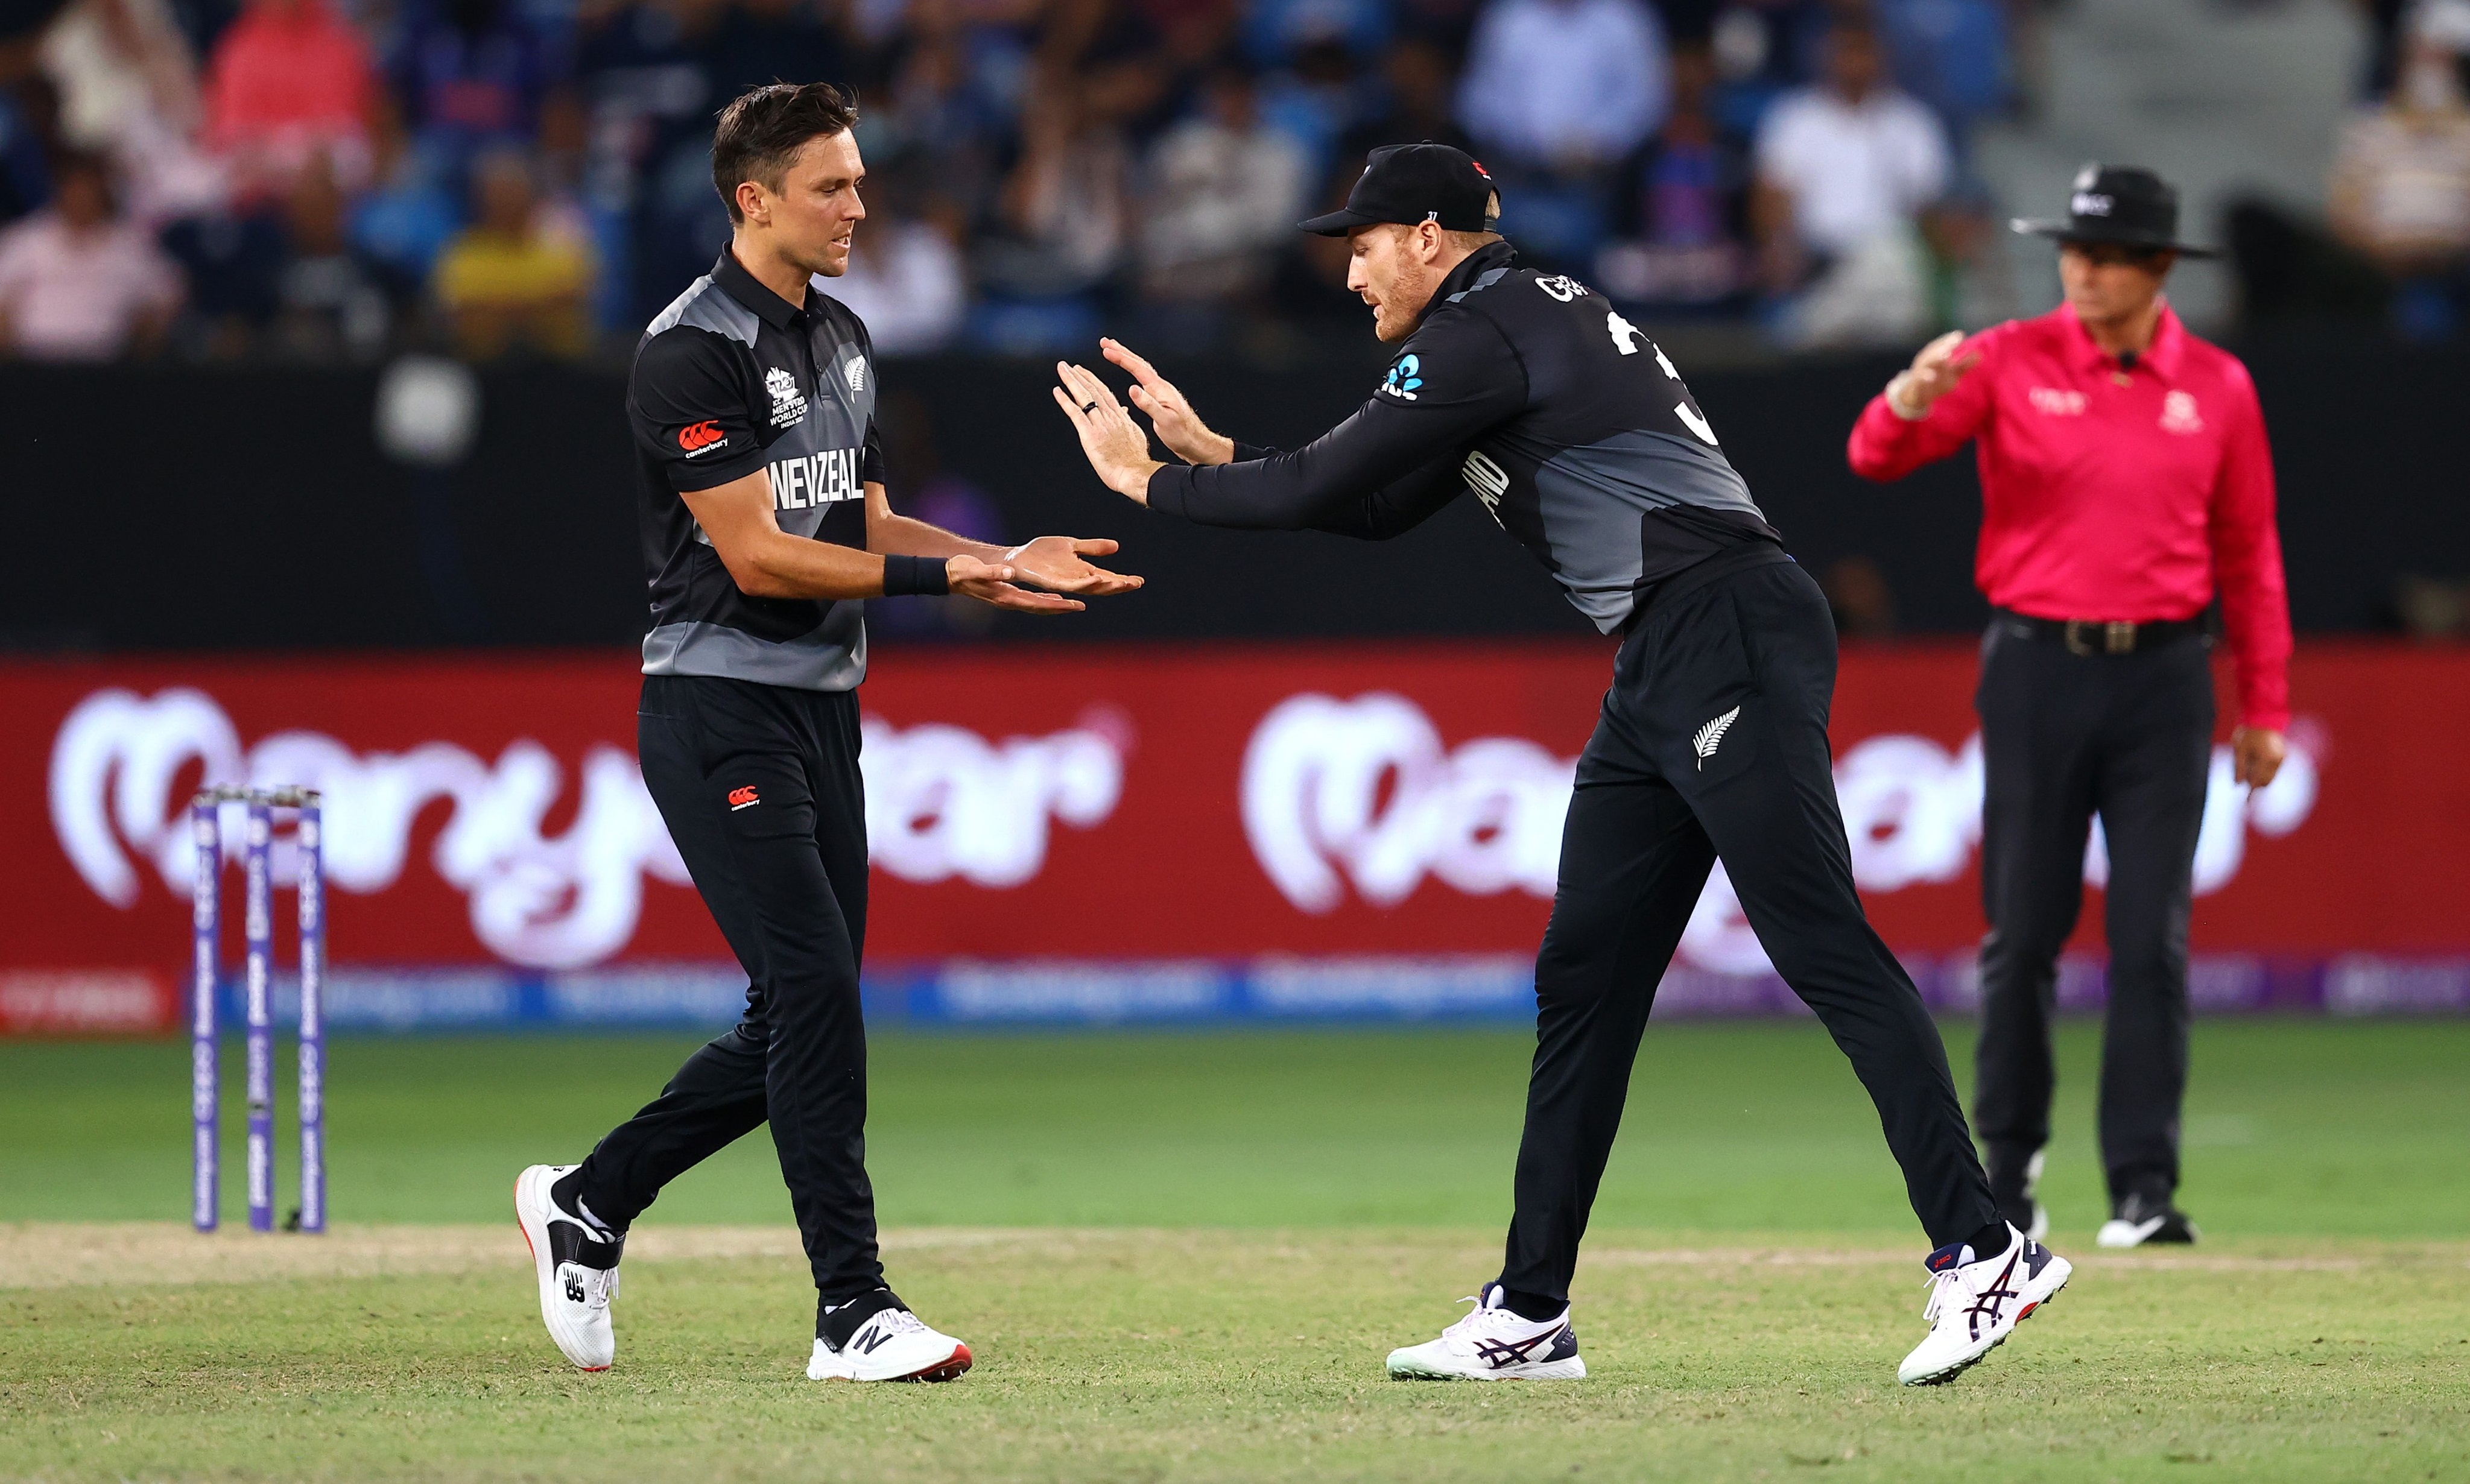 Super Smash 2021-22 | WATCH: Trent Boult hits last-ball six to seal thrilling win for Northern Brave